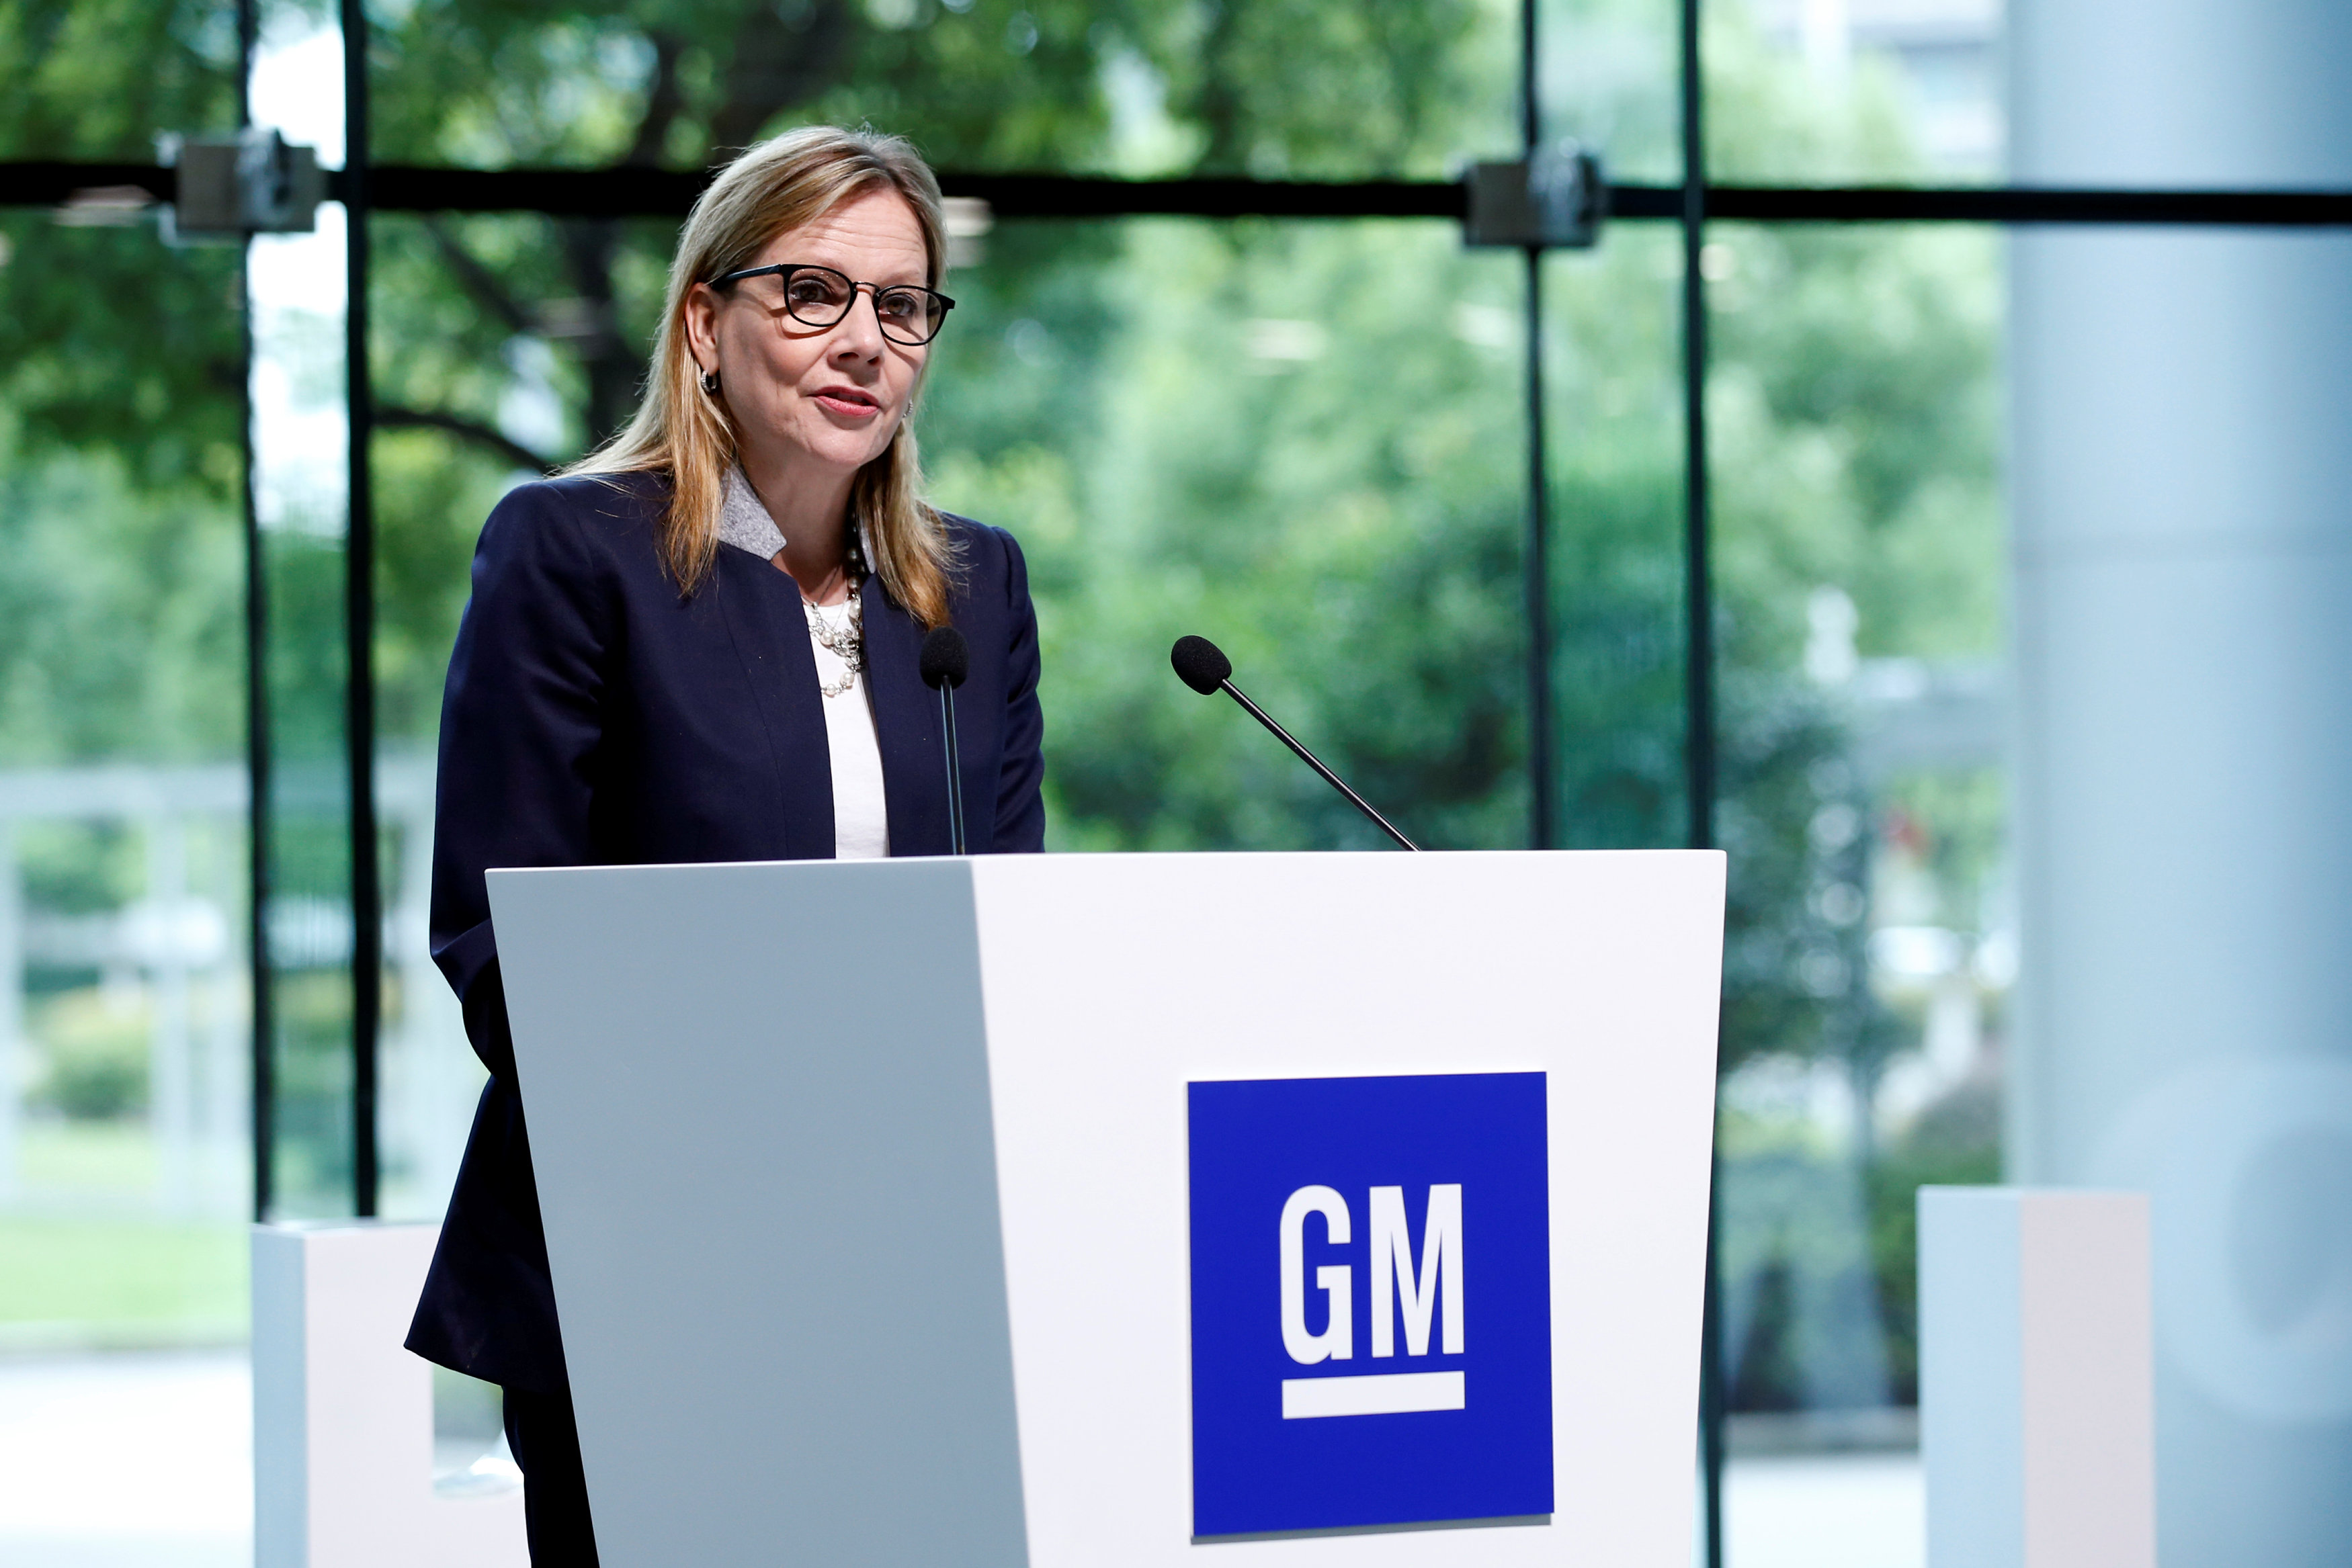 GM's Cruise aims to open self-driving tests to public; timing unclear